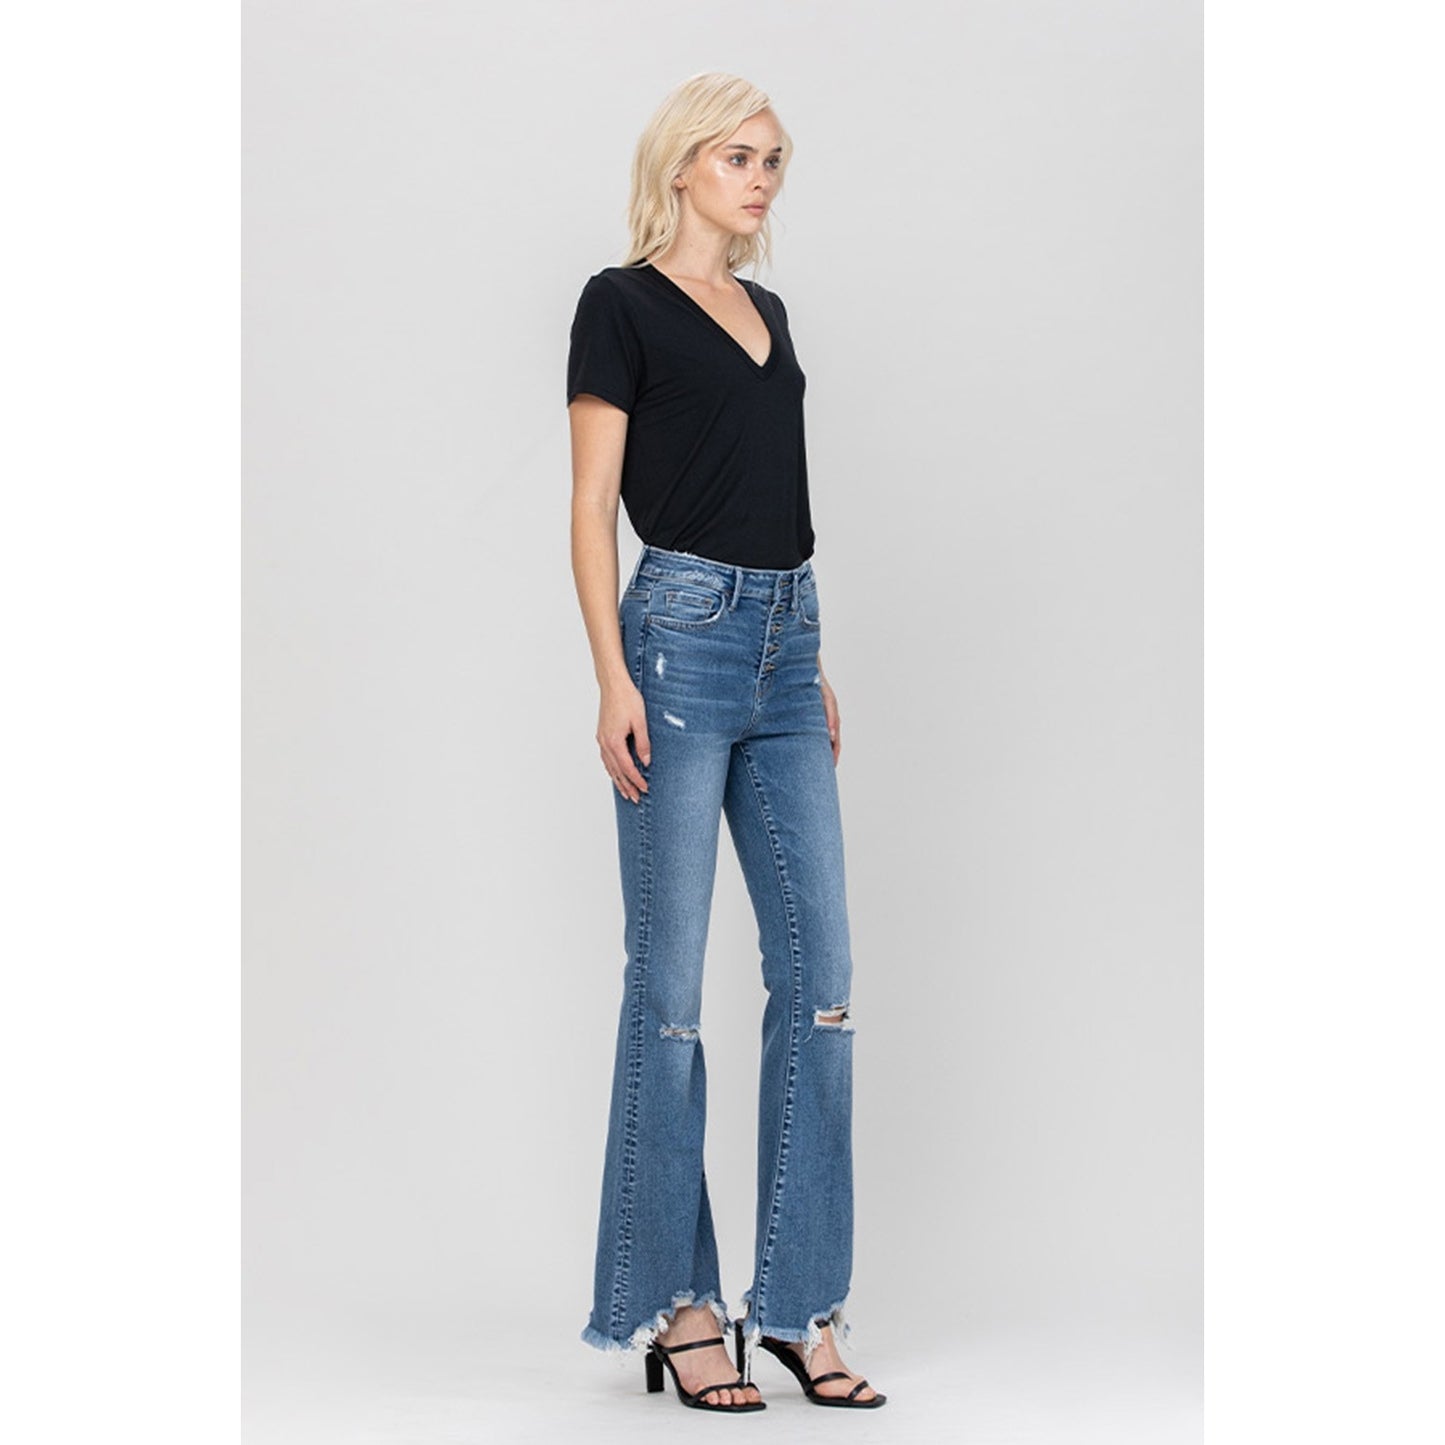 Serenity High Waisted Distressed Flare Jeans - Wild Luxe Boutique